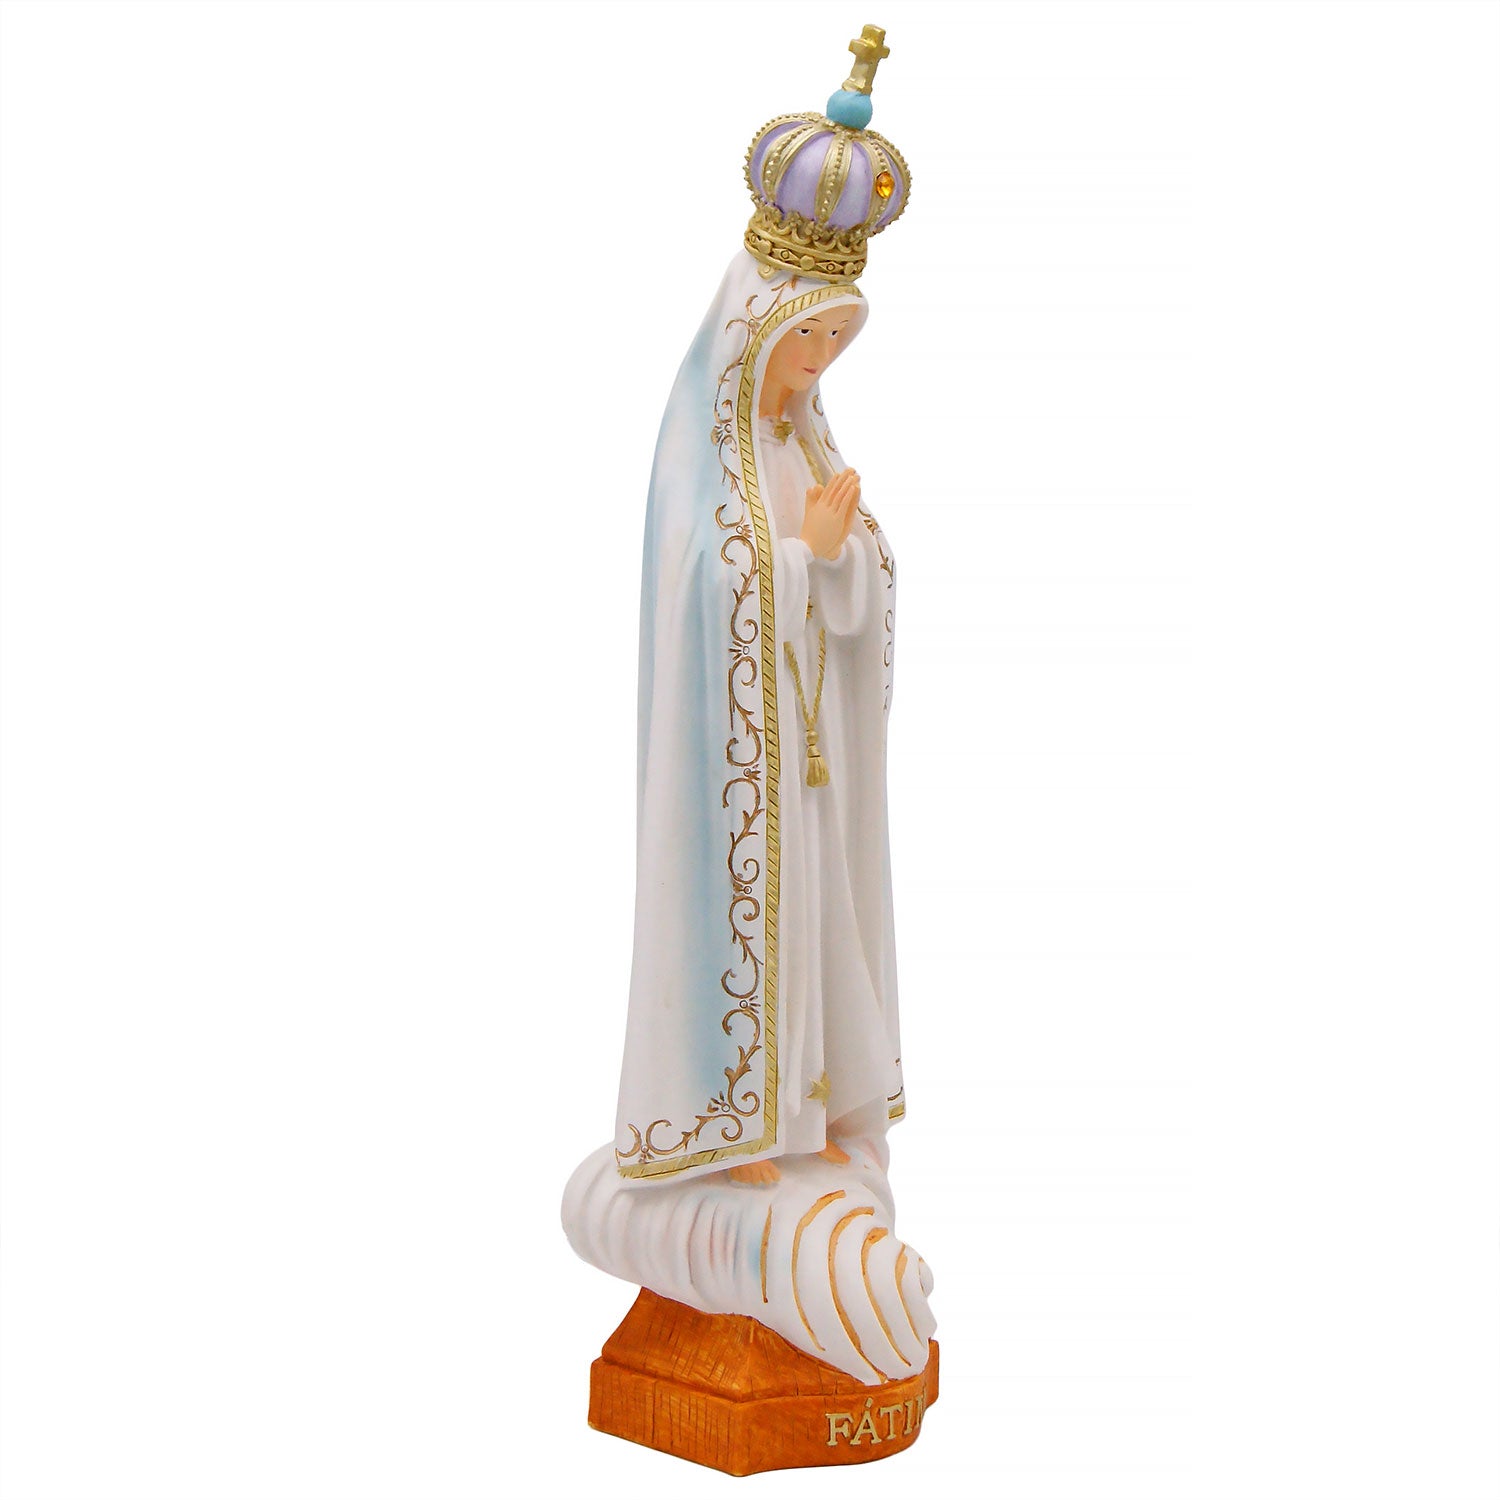 The Our Lady of Fatima figurine sits on a cloud and has an ornate crown. The impressive craftsmanship and attention to detail on the face of the Virgin, gives the statue a lifelike appearance making it the perfect inspiring religious gift for any occasion.